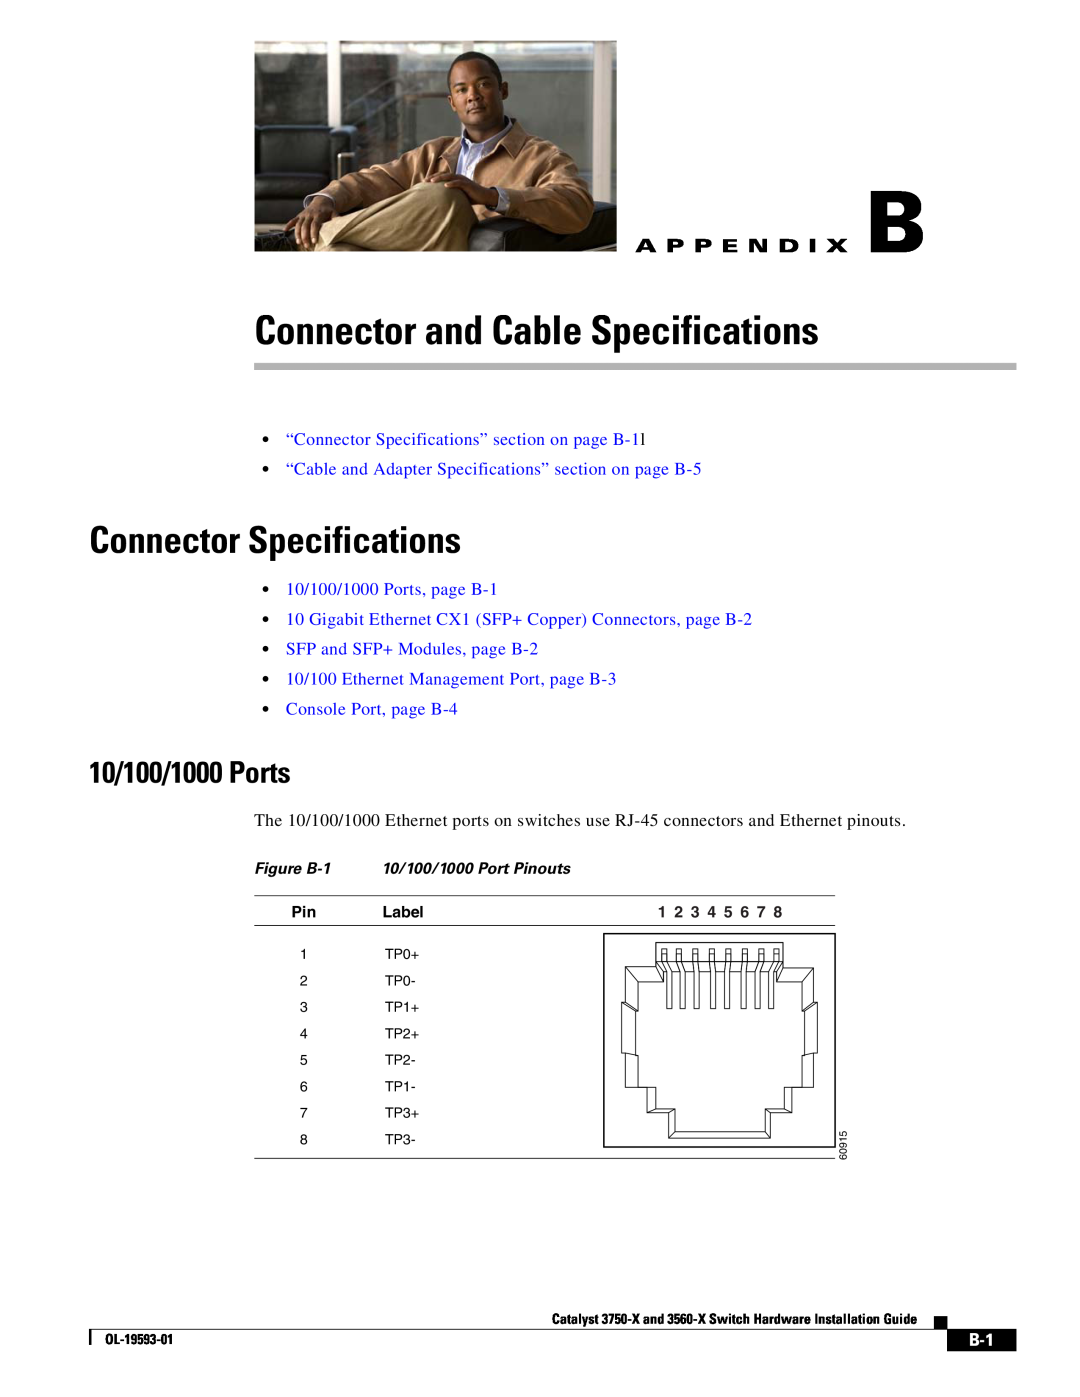 Cisco Systems 3560-X Connector and Cable Specifications, Connector Specifications, 10/100/1000 Ports, A P P E N D I X B 